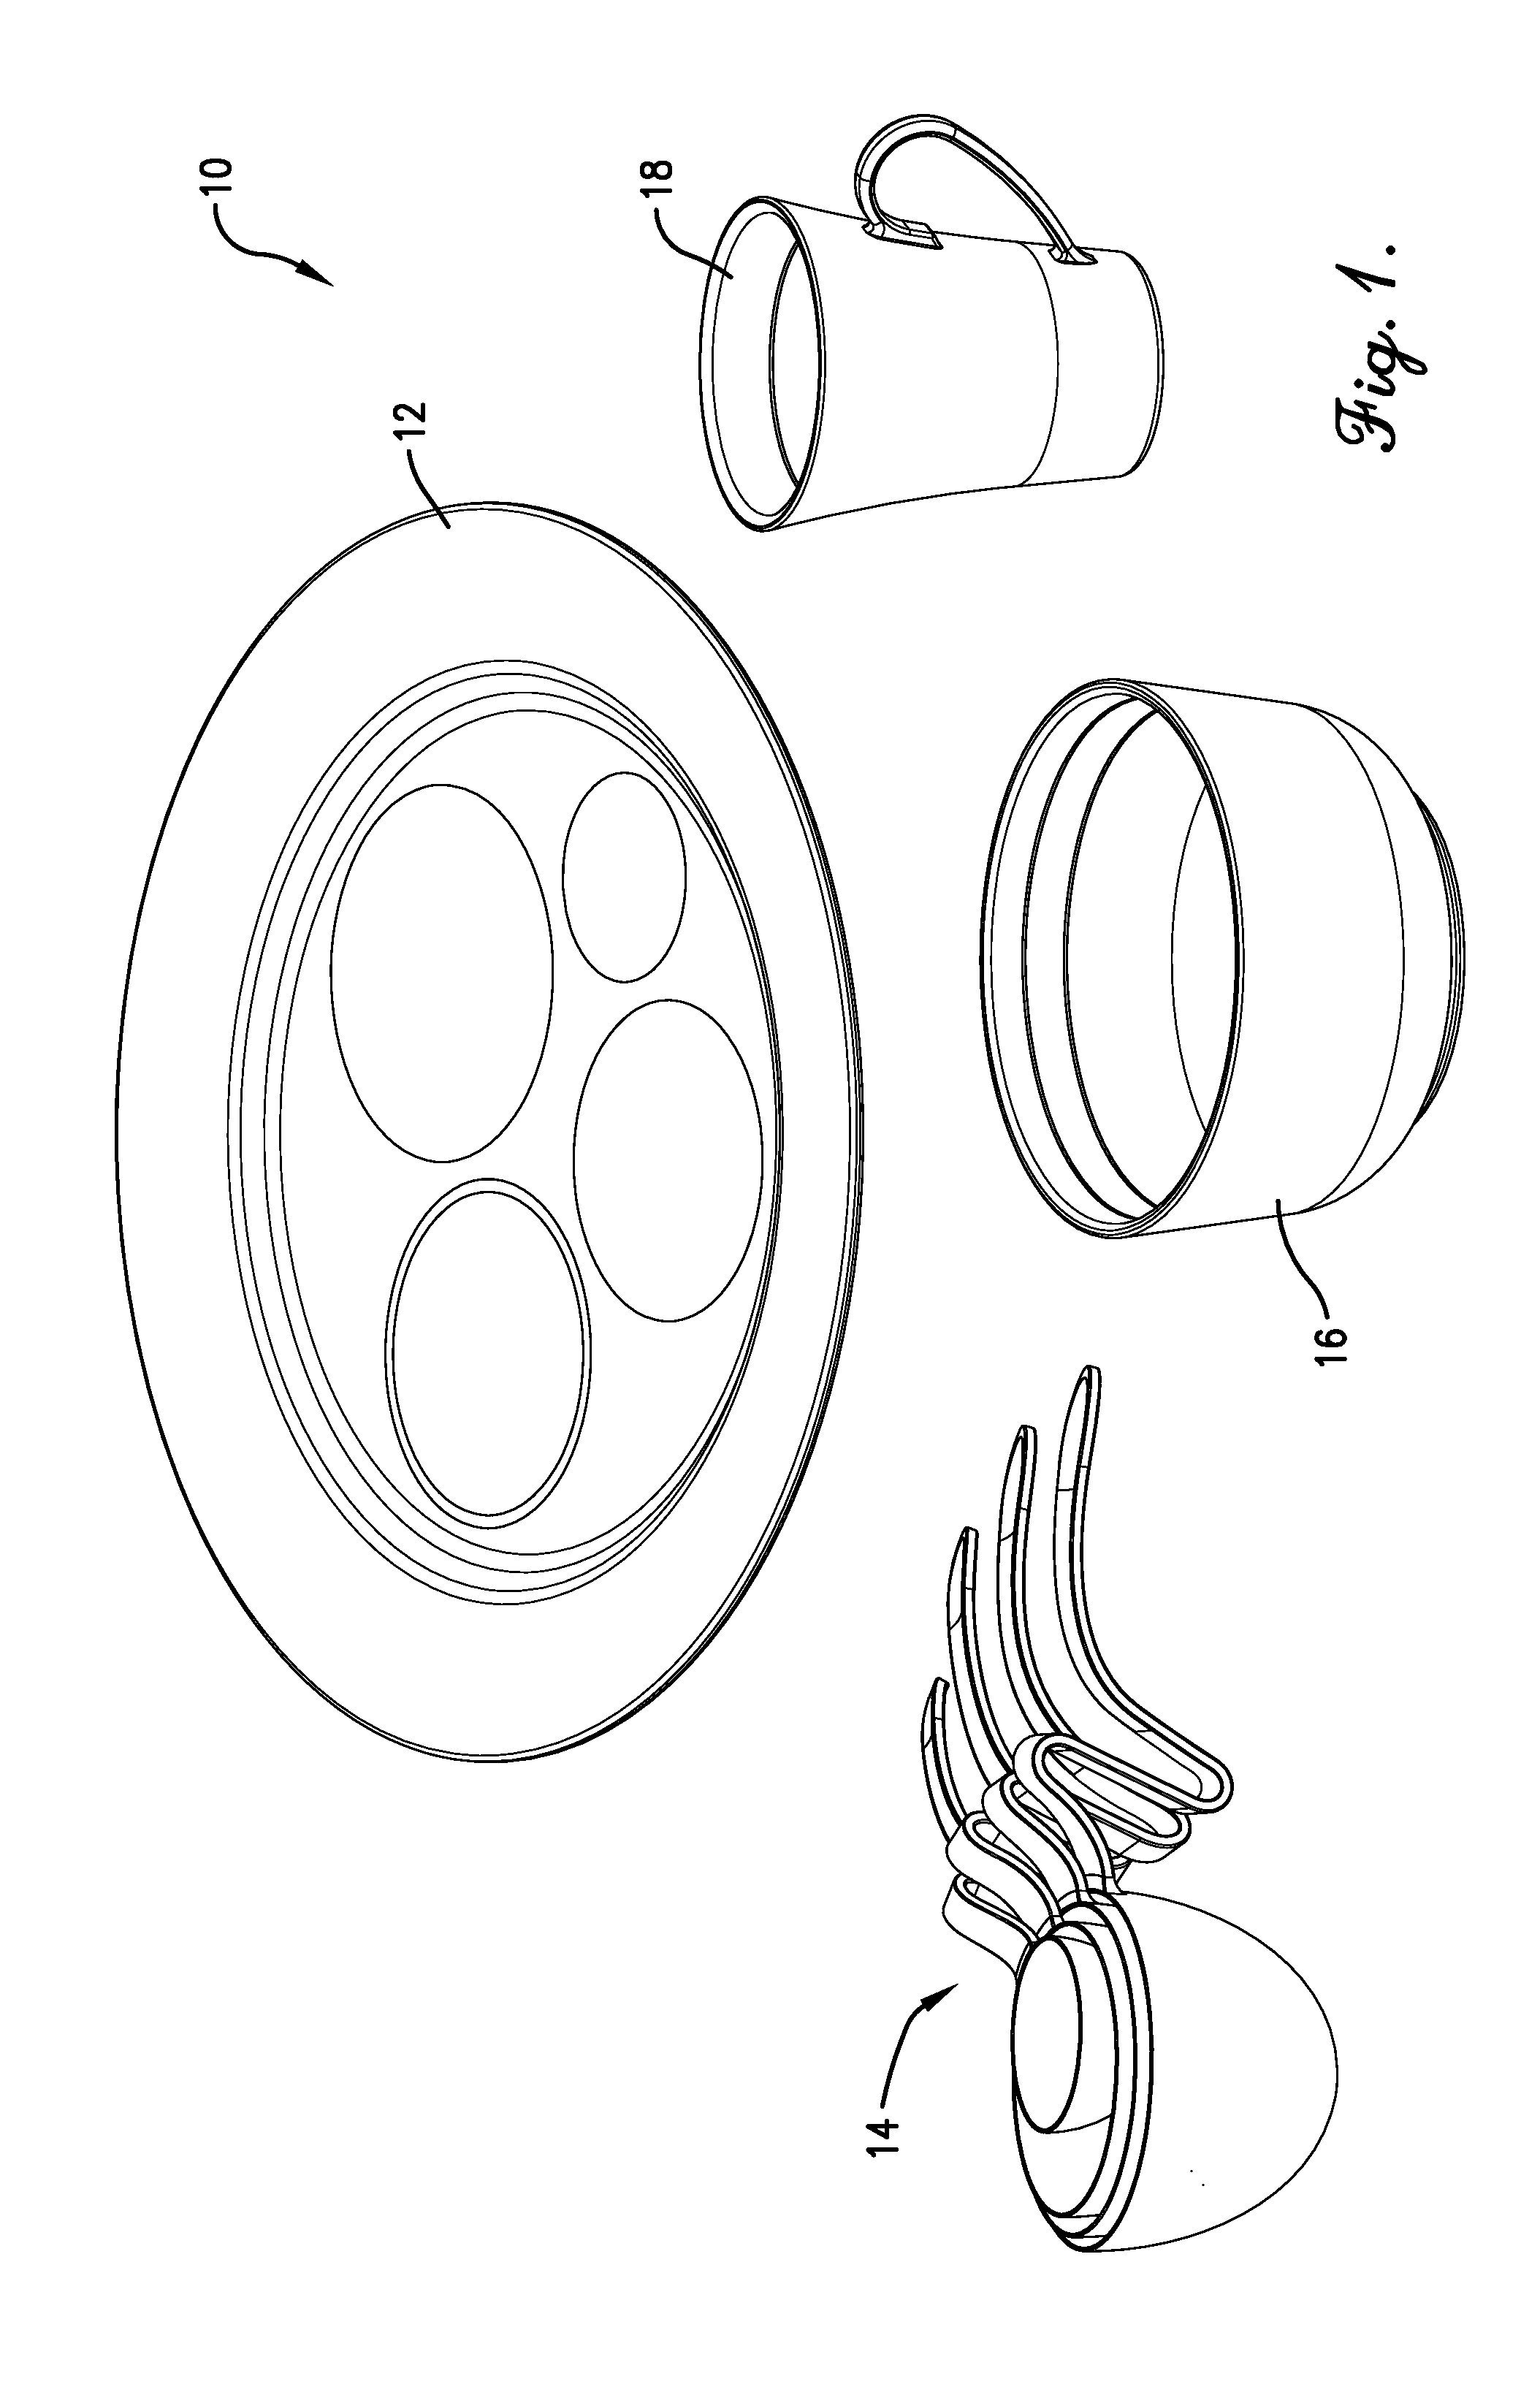 System and apparatus for assisting a user in portion control while eating